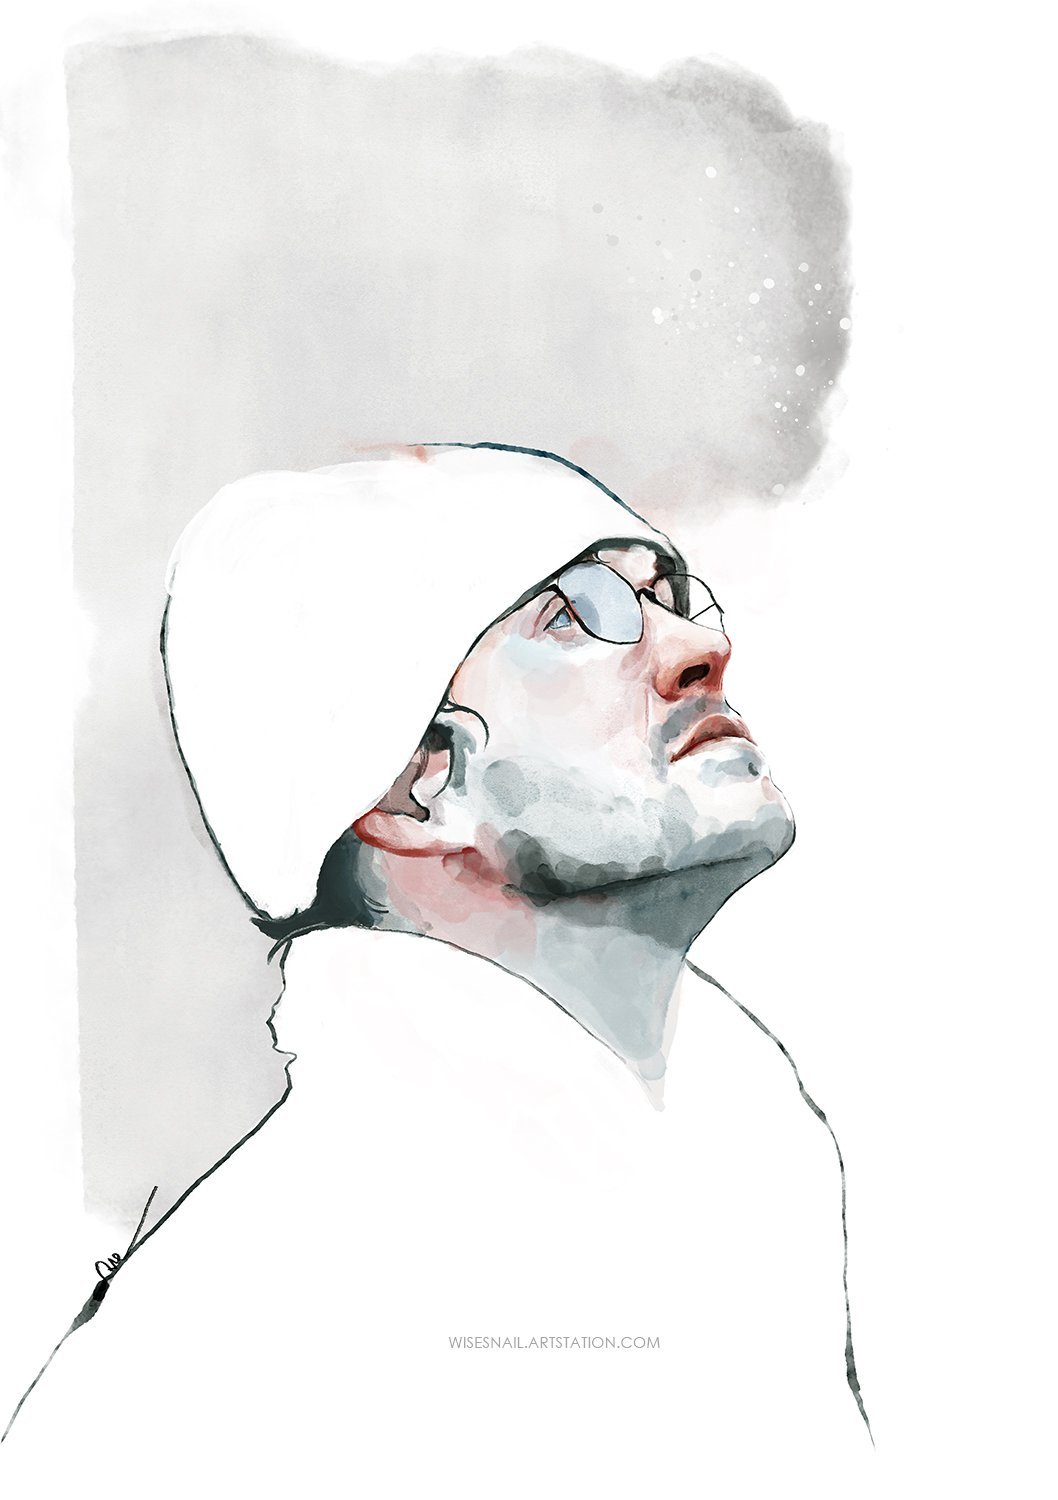 wisesnail:Lately, my bouts of procrastination involve experimenting with watercolours